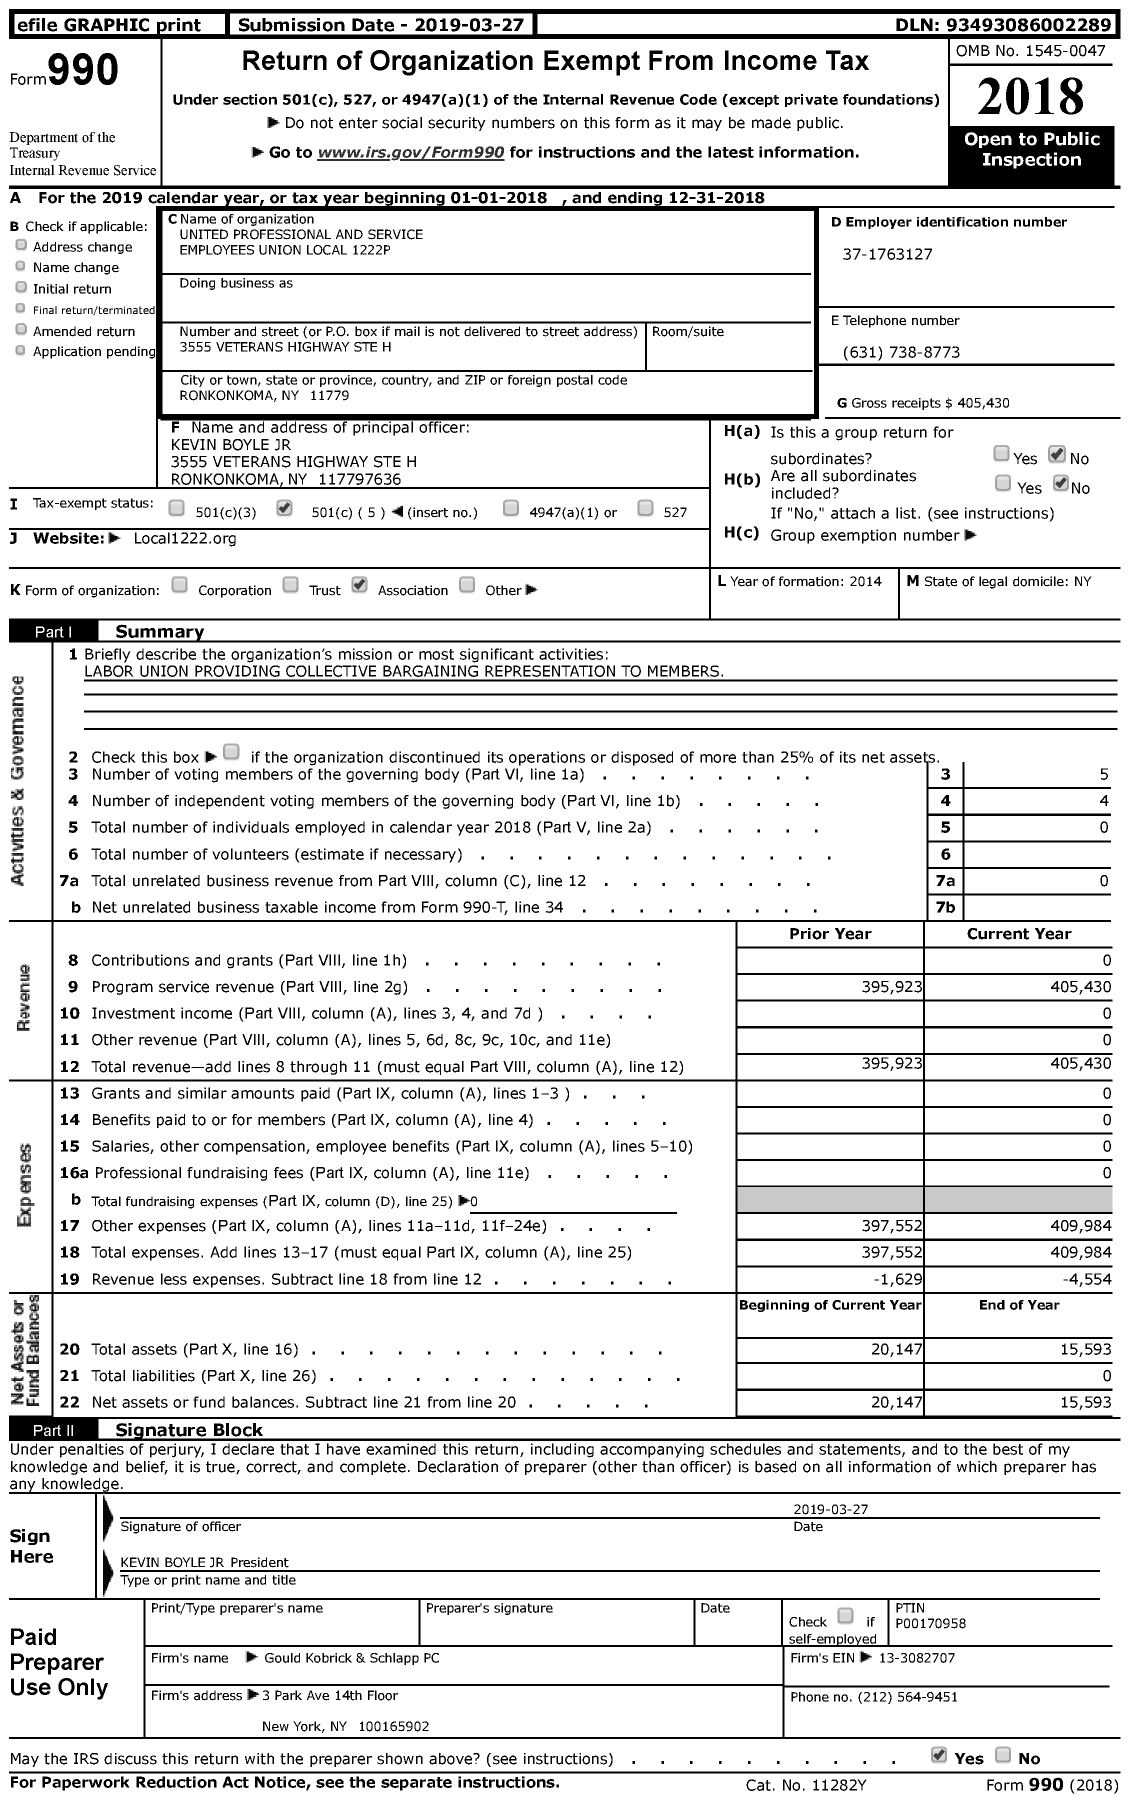 Image of first page of 2018 Form 990 for United Professional and Service Employees Union Local 1222